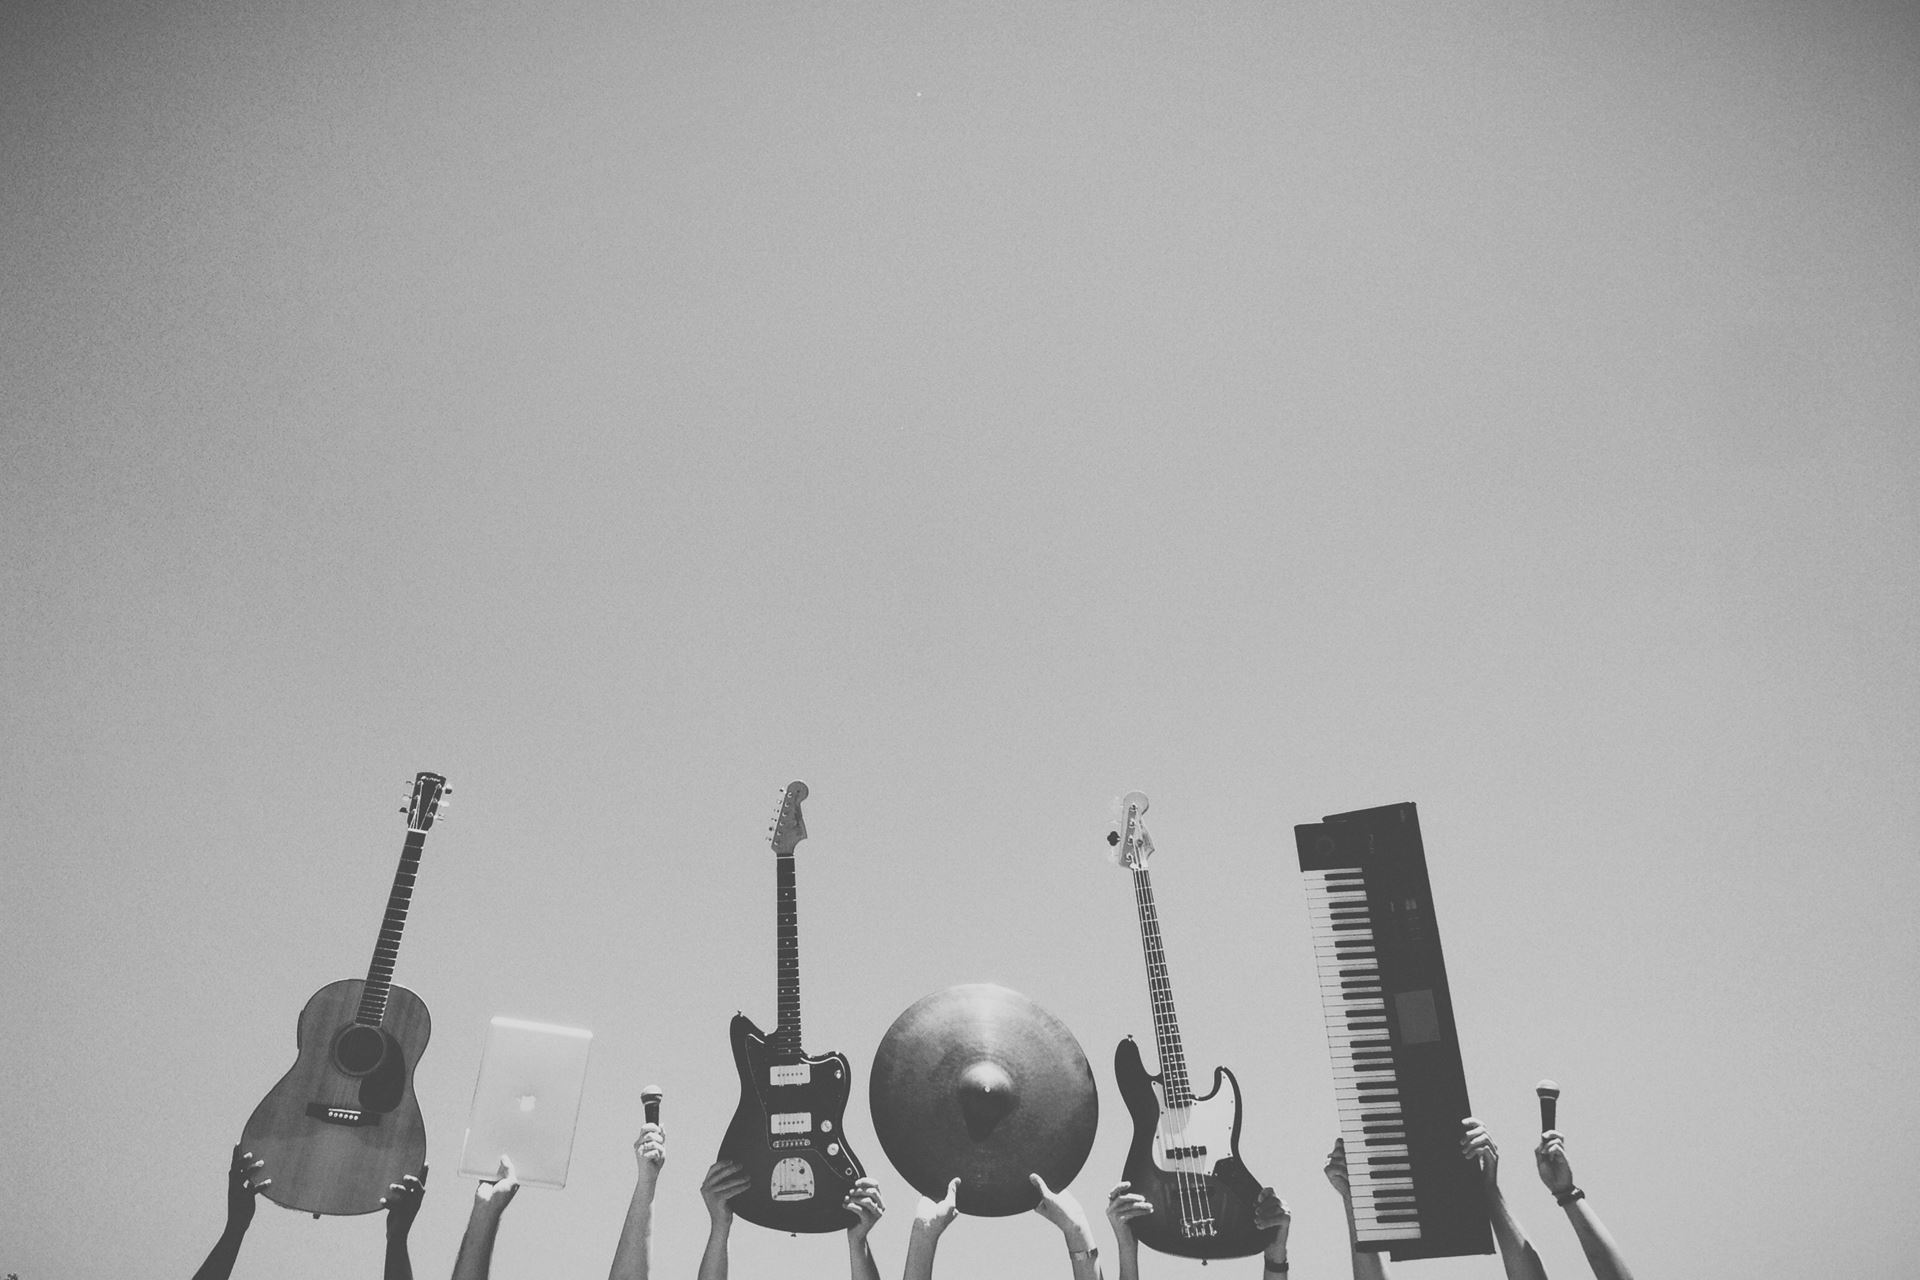 `<img alt="Variety of instruments in a decorative photo"`>